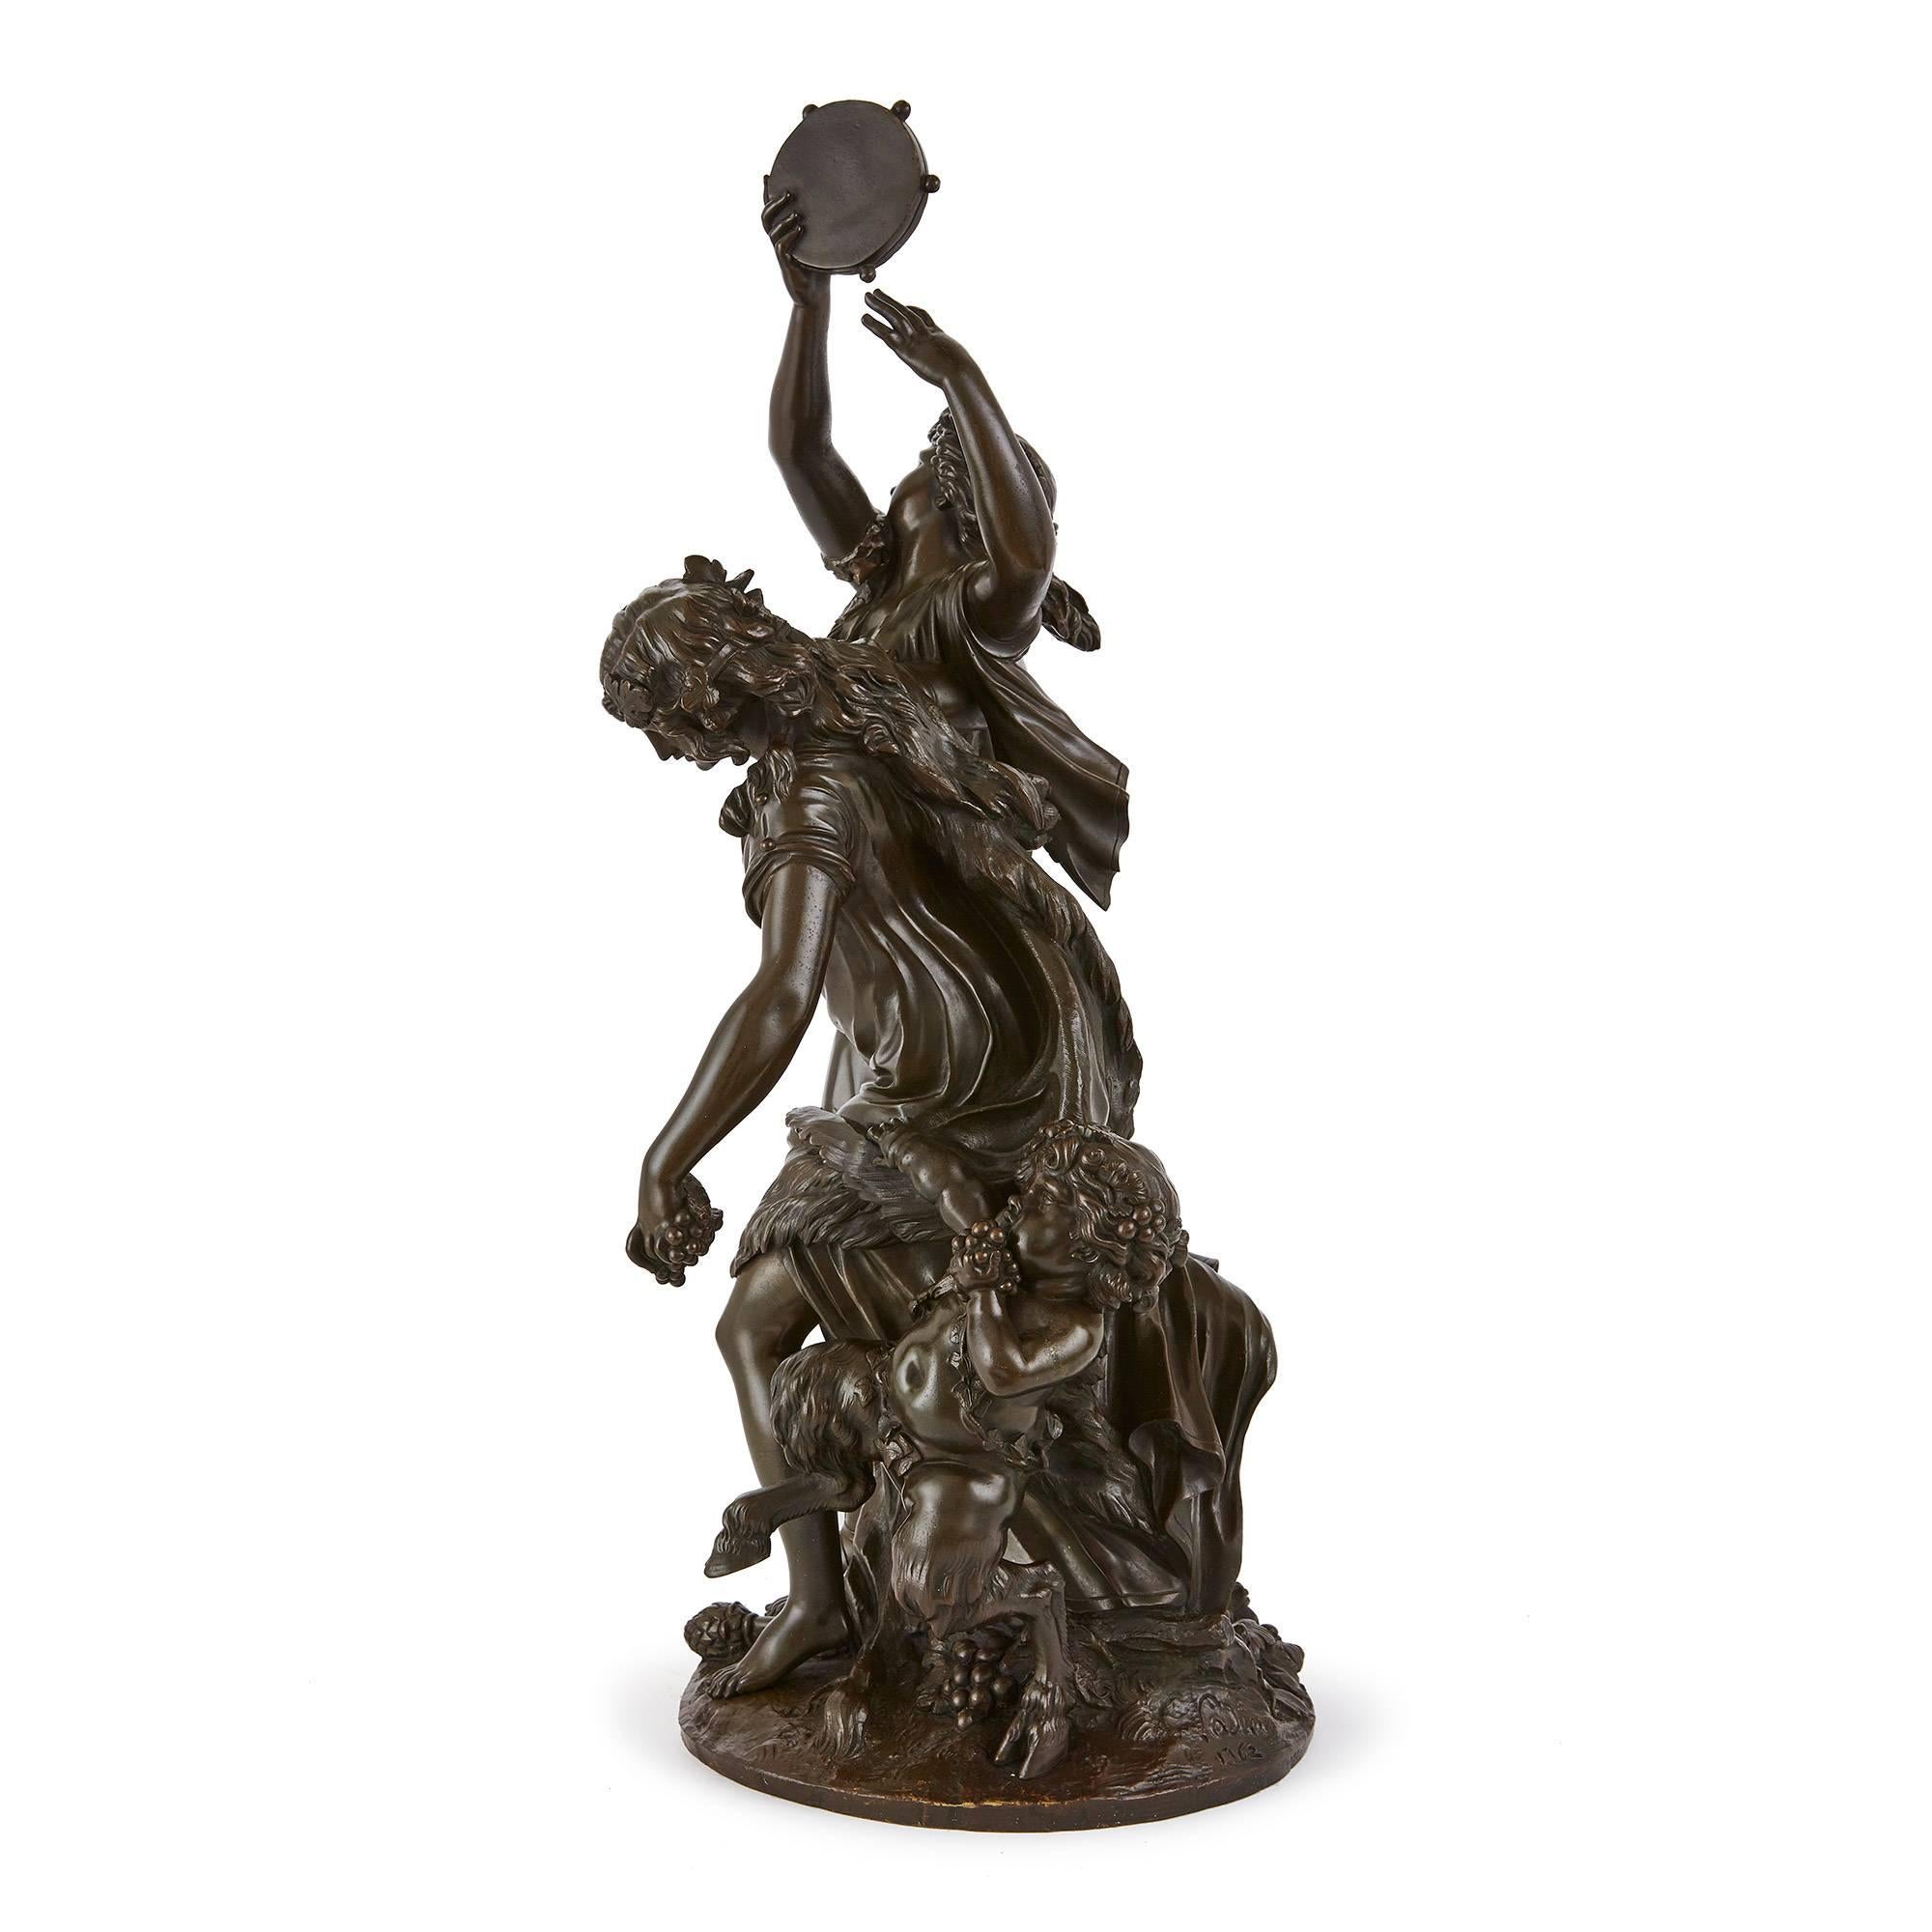 This dynamic antique patinated bronze sculpture is composed of two female figures and a satyr captured in a moment of frenzied dancing and Bacchic revelry. The women are dressed in flowing tunics, with their figures adorned with flowers and vines.